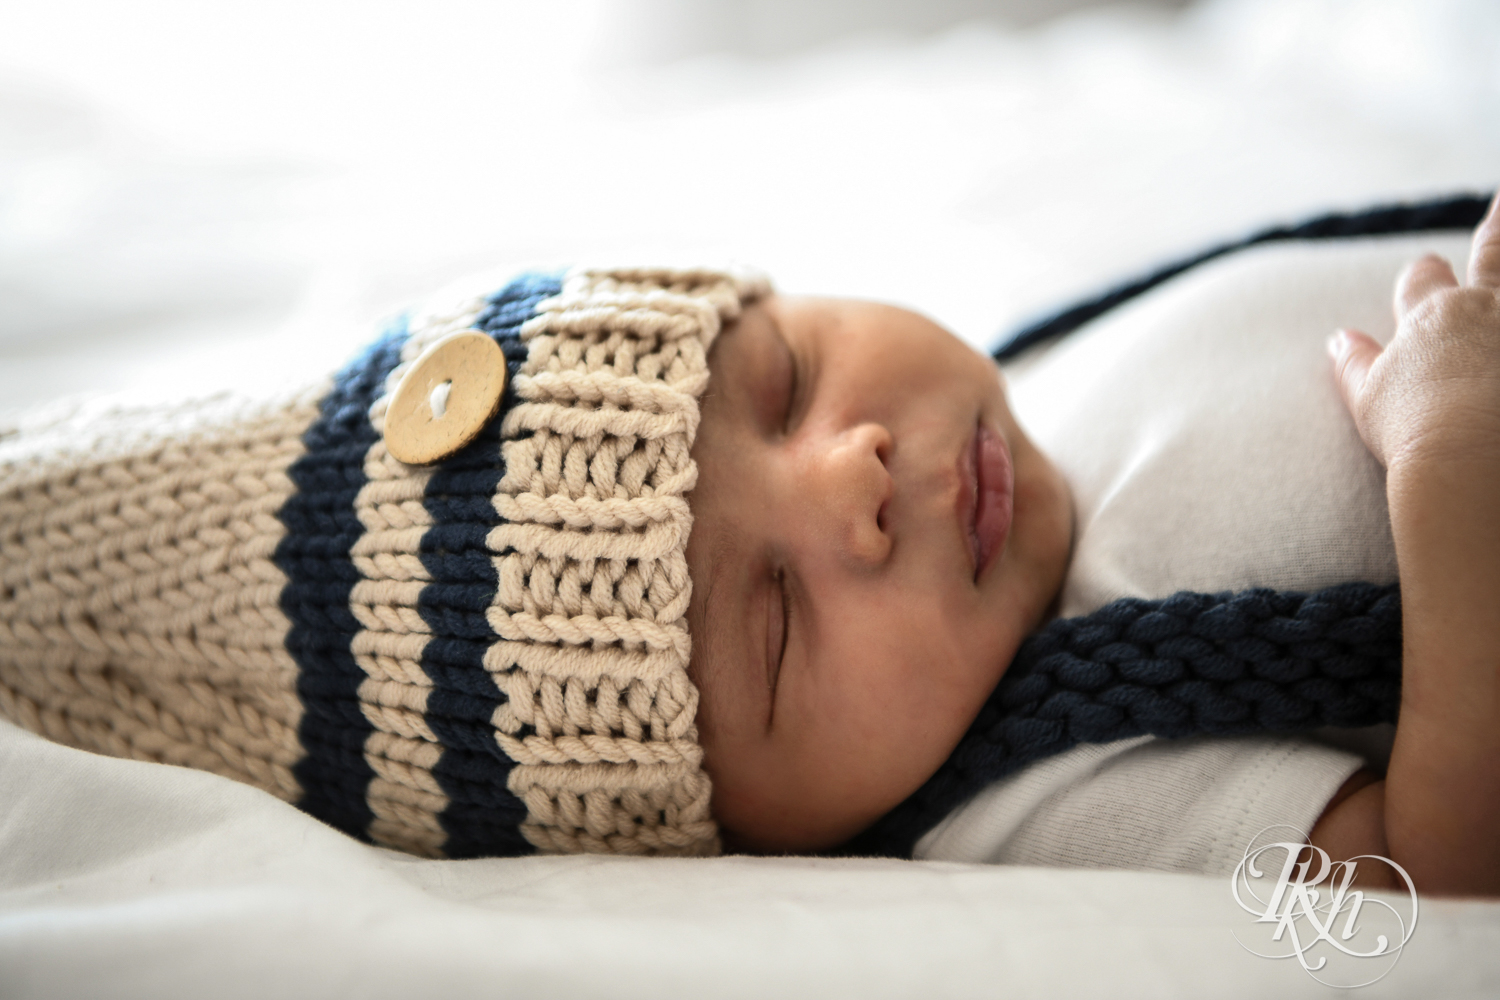 Biracial baby wearing knit cap sleeps on a bed in Burnsville, Minnesota at home.